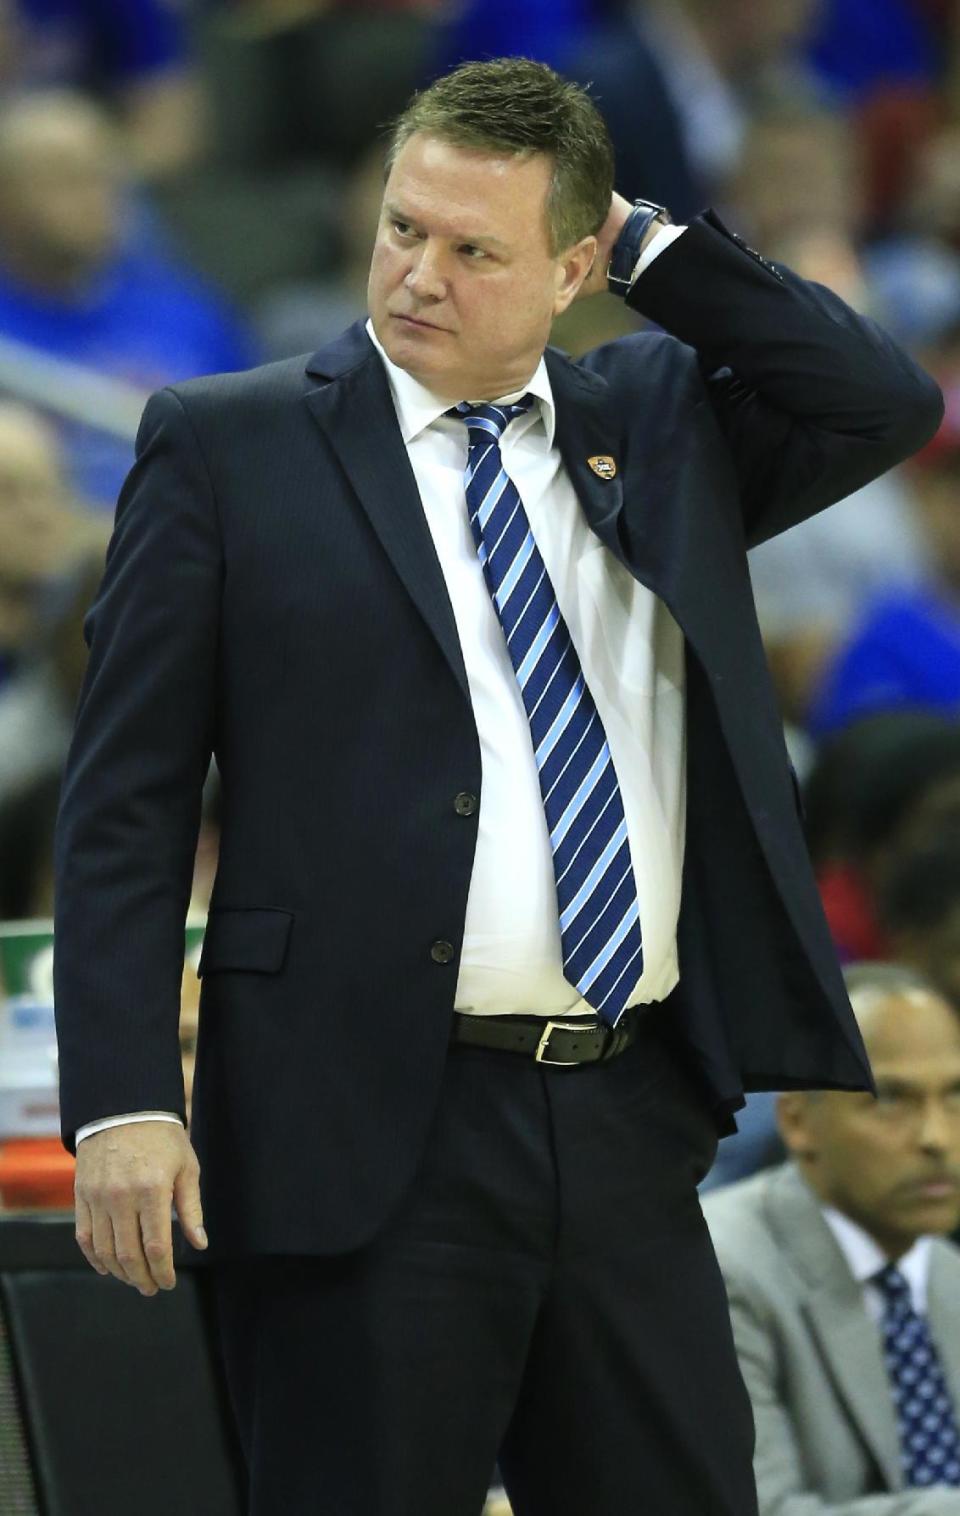 Kansas head coach Bill Self scratches his head during second half of an NCAA college basketball game against TCU in the quarterfinal round of the Big 12 tournament in Kansas City, Mo., Thursday, March 9, 2017. TCU defeated Kansas 85-82. (AP Photo/Orlin Wagner)